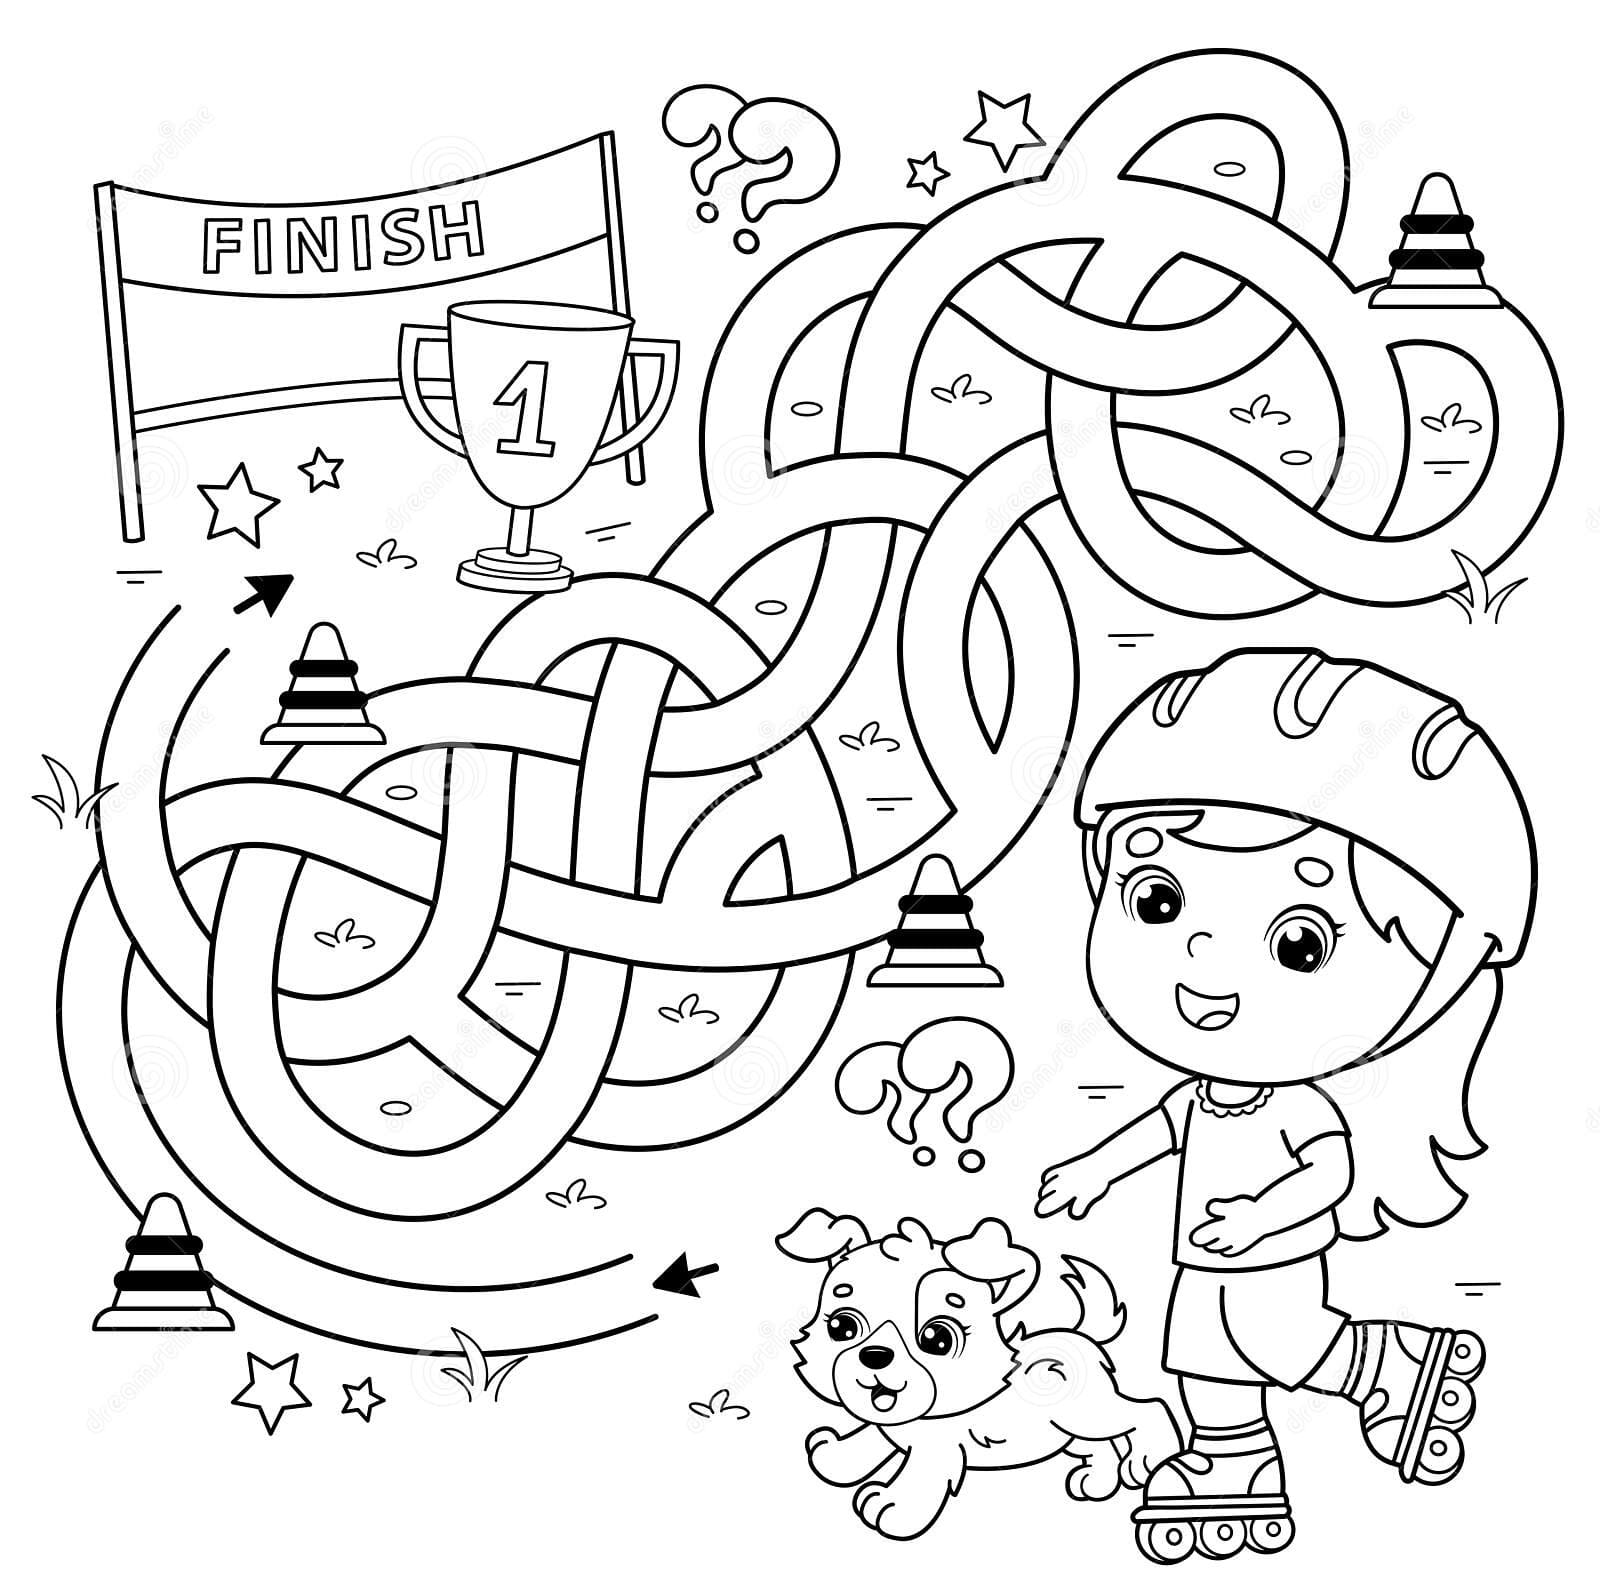 A Roller Skate Download For Kids Coloring Page